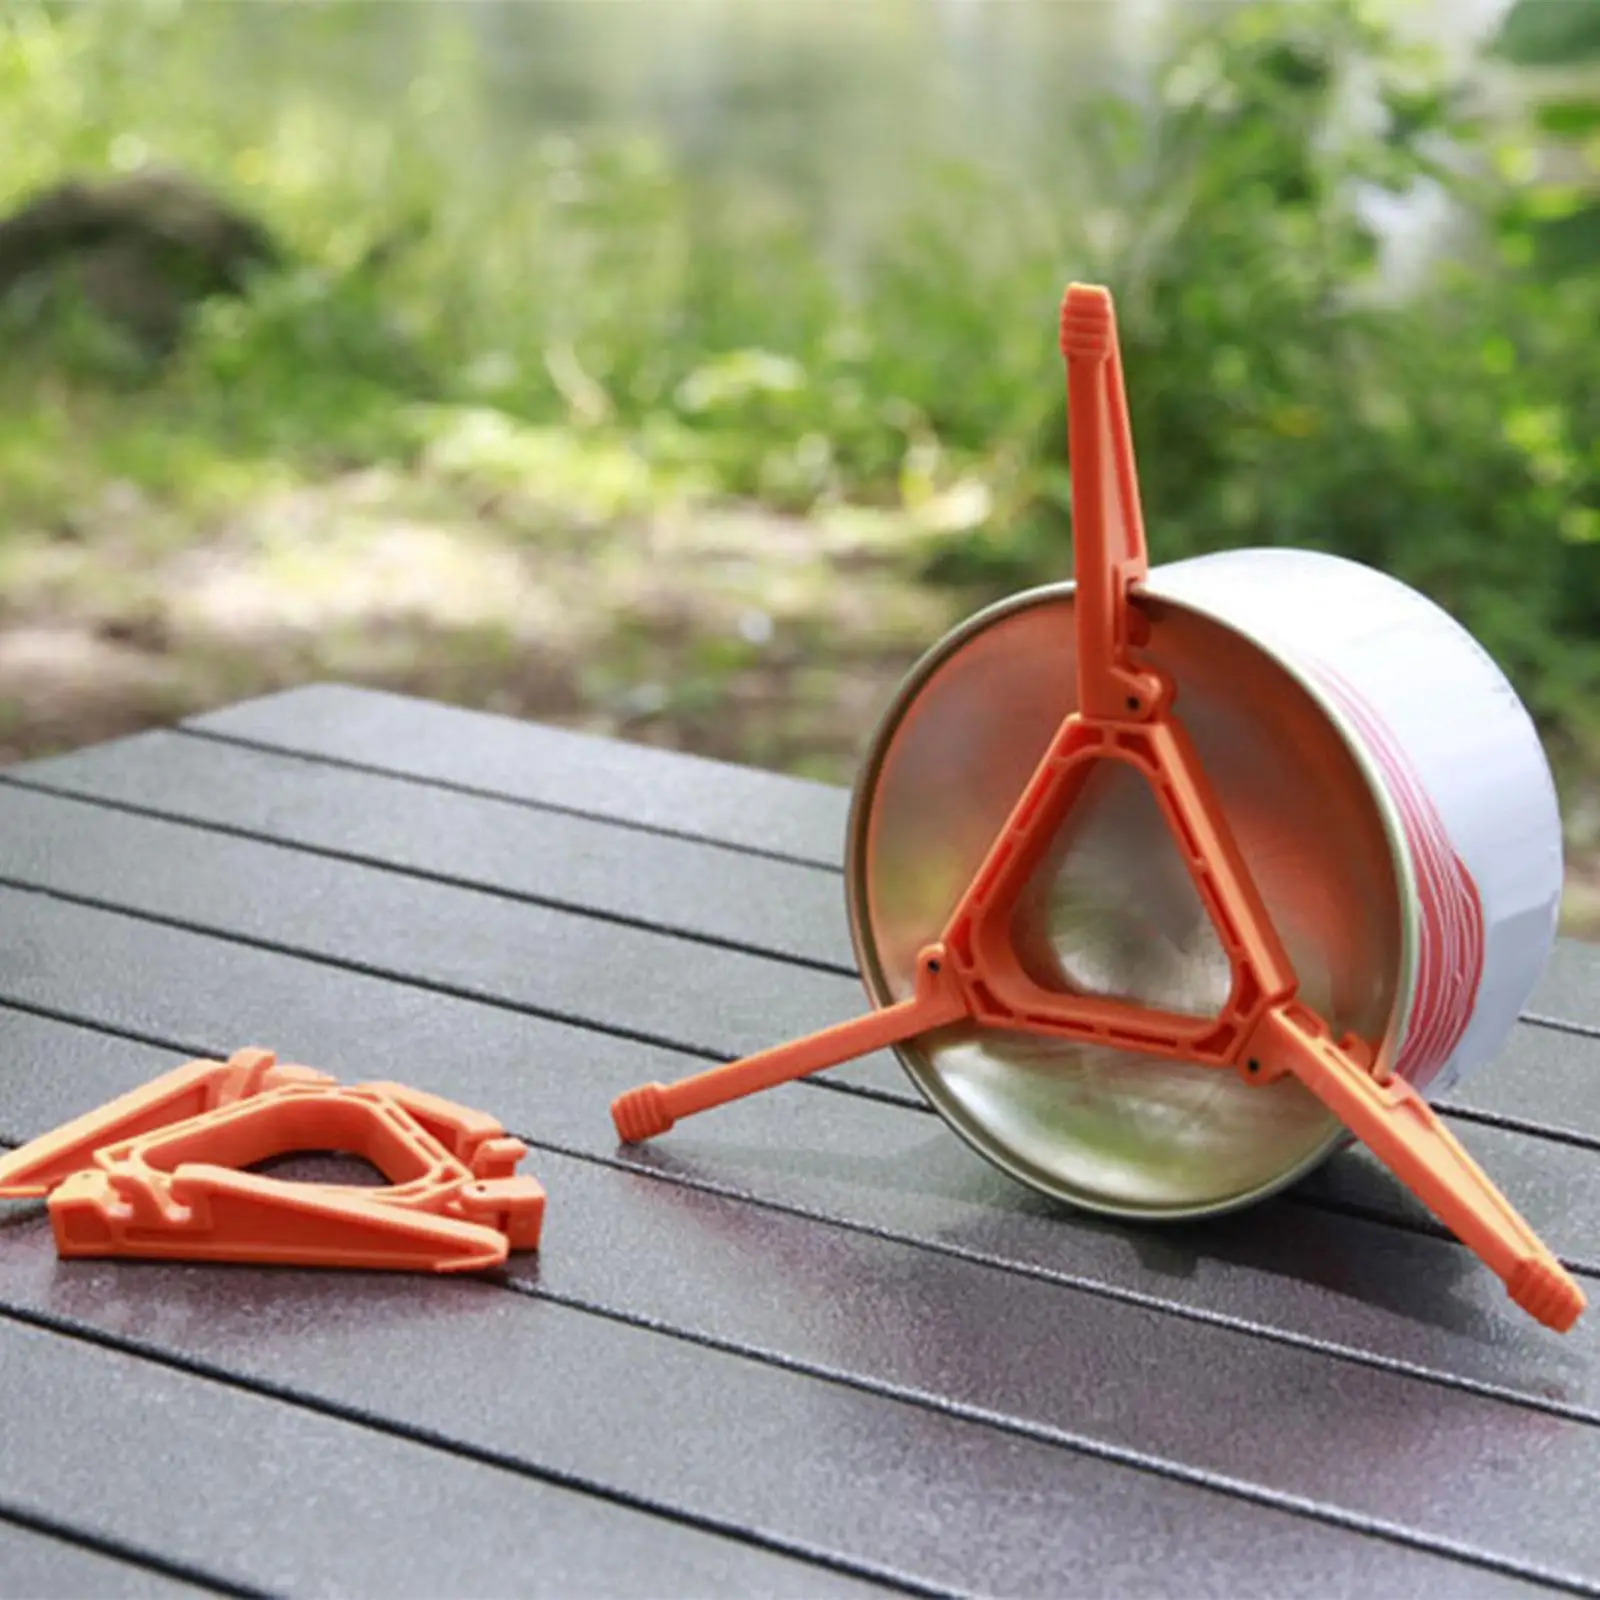  Fuel Canister Stand Foldable Gas Stove Bracket for Outdoor  Portable Backpacking Stove Accessories